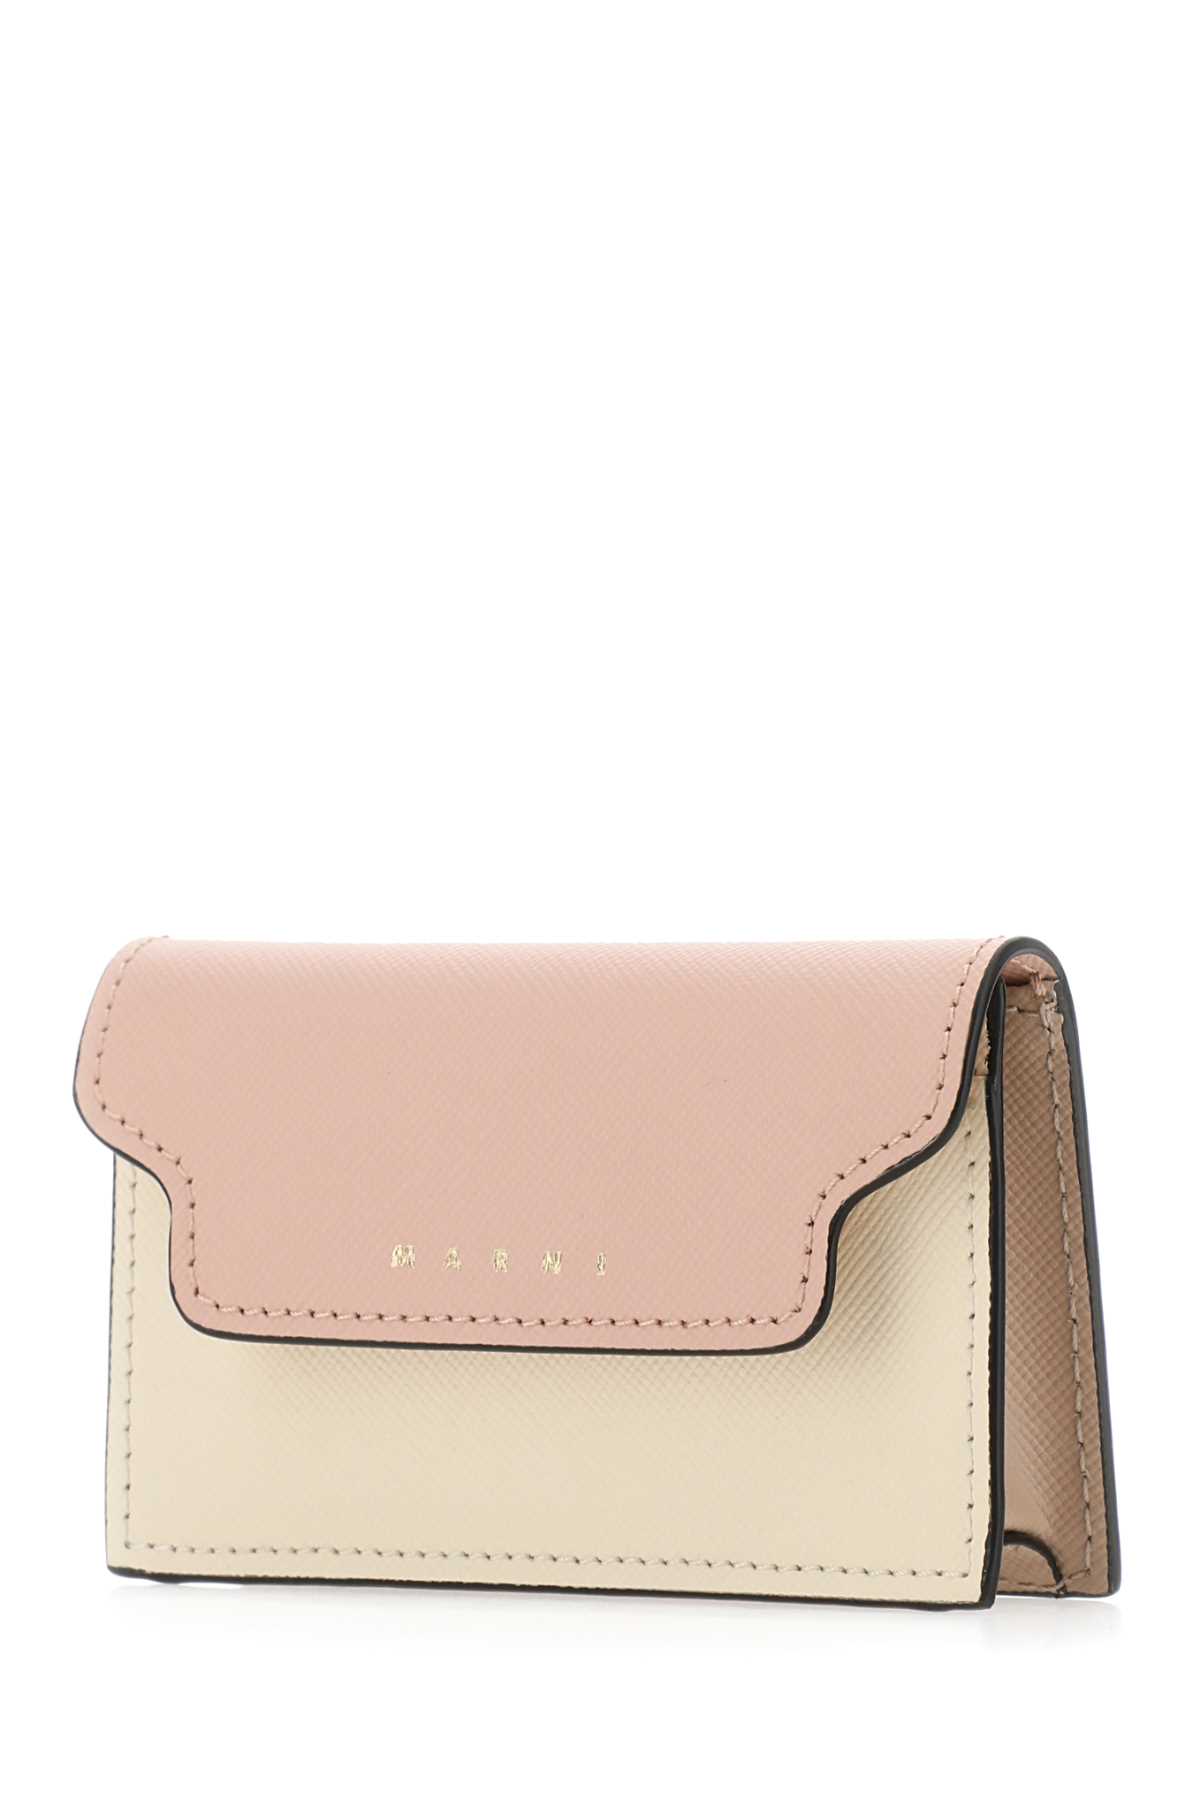 Marni Multicolor Leather Business Card Holder In Z605m